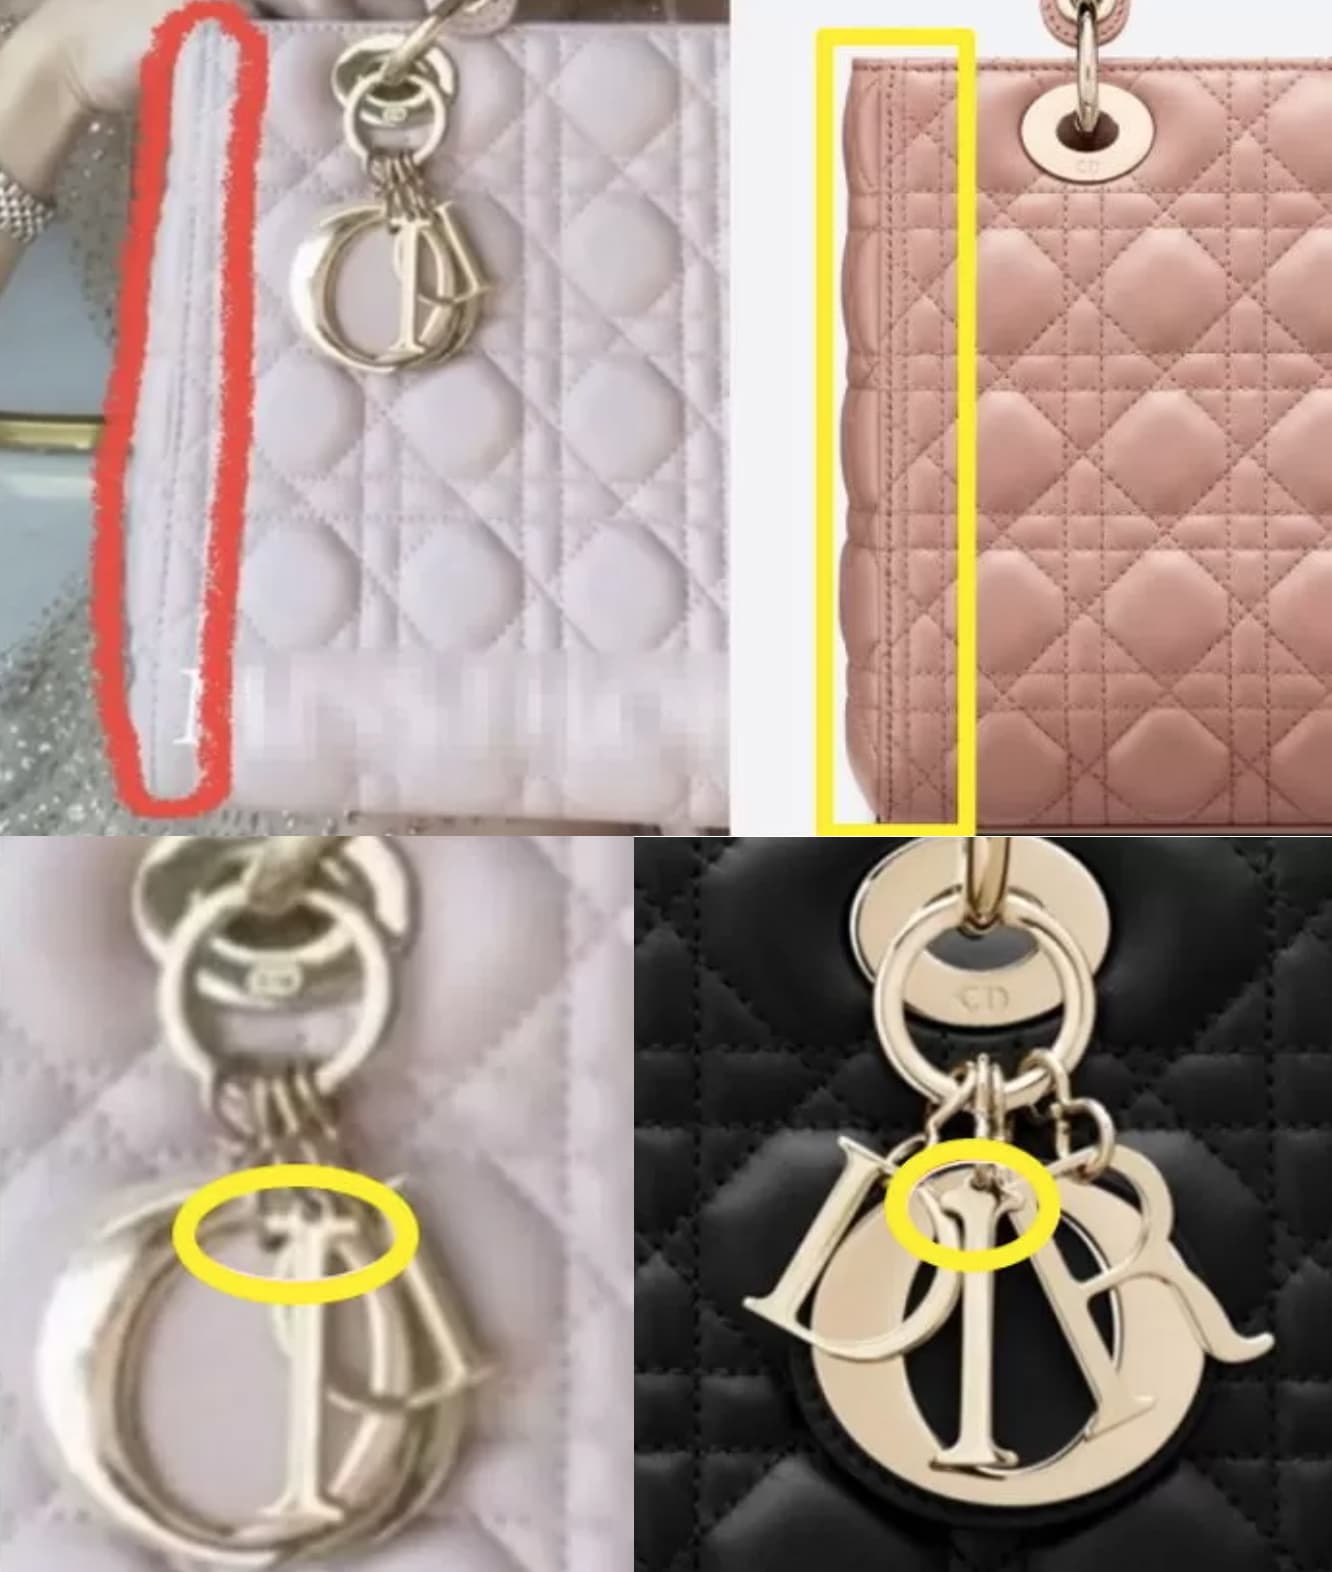 11 authentic high quality replica Dior bag from Candywe will send you PSP  to confirm quality before shipmentif interested please contact with me   rRepGirls